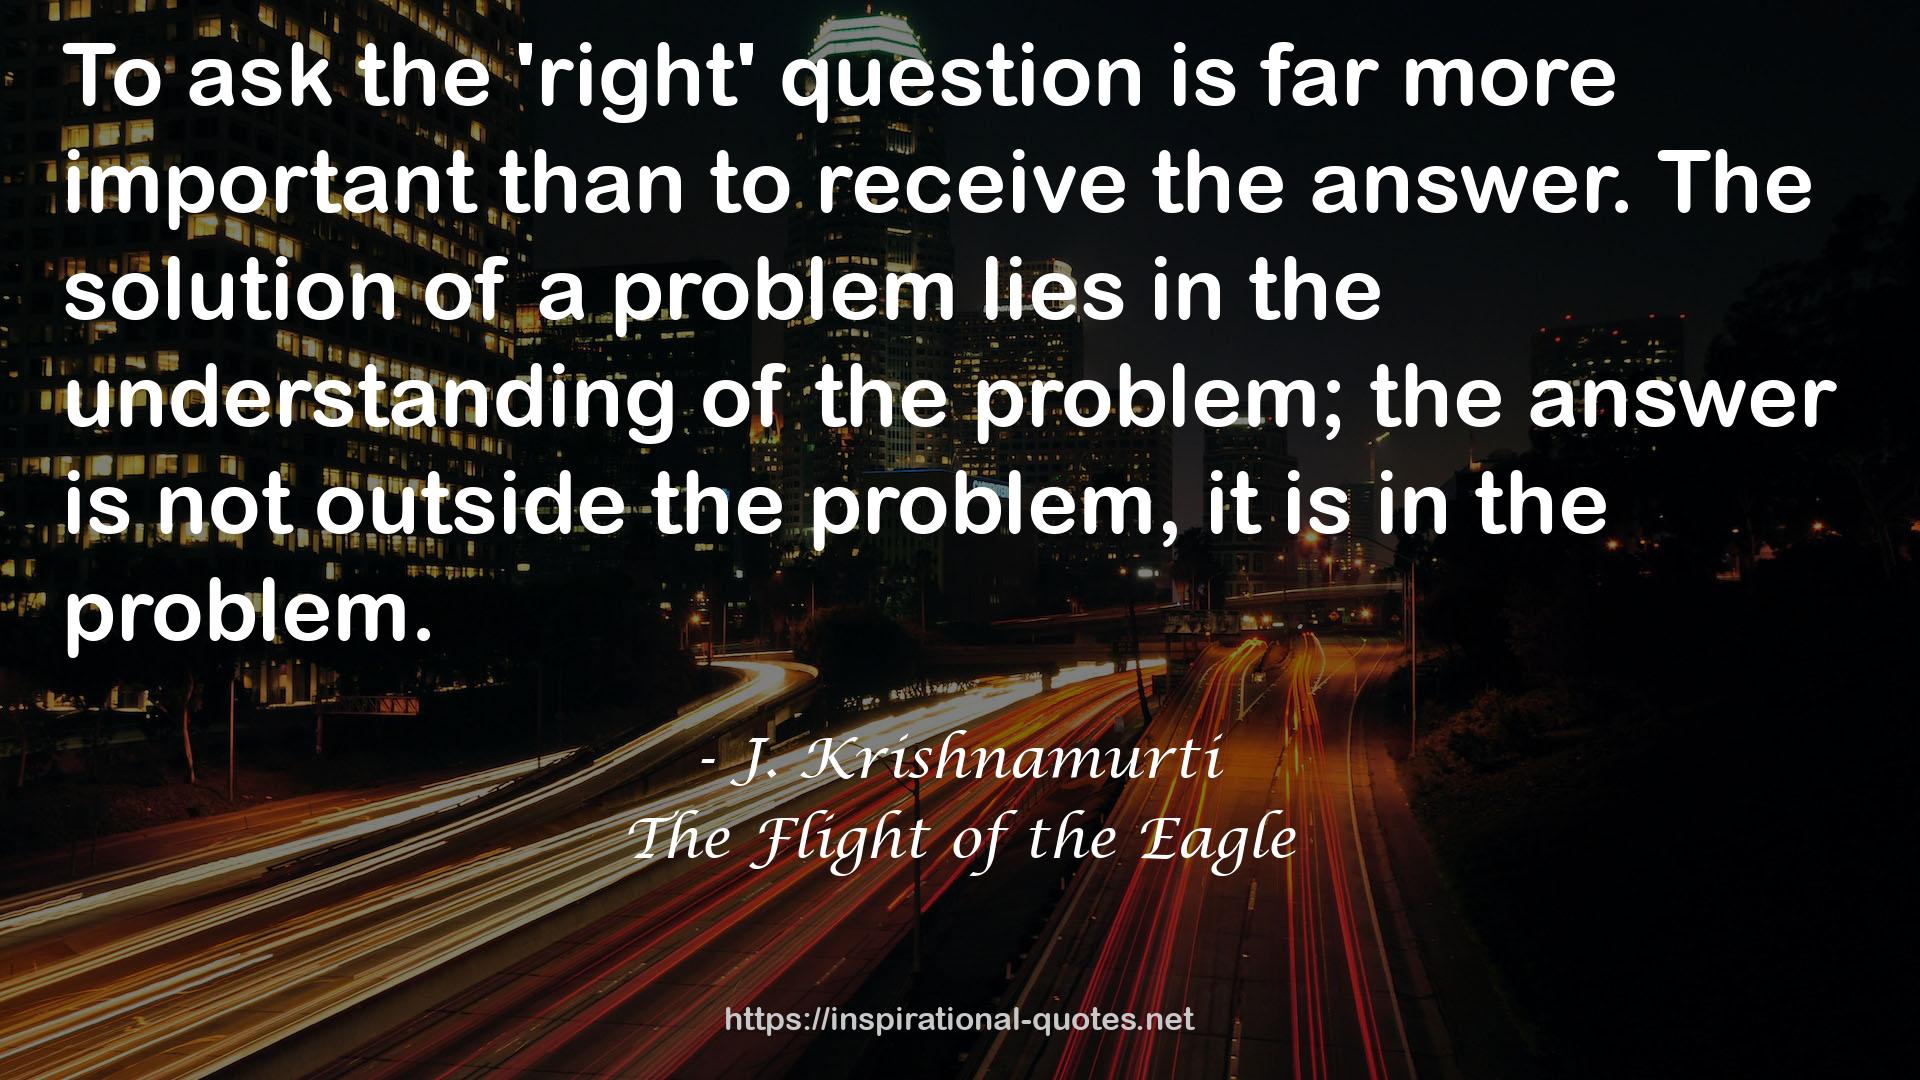 The Flight of the Eagle QUOTES